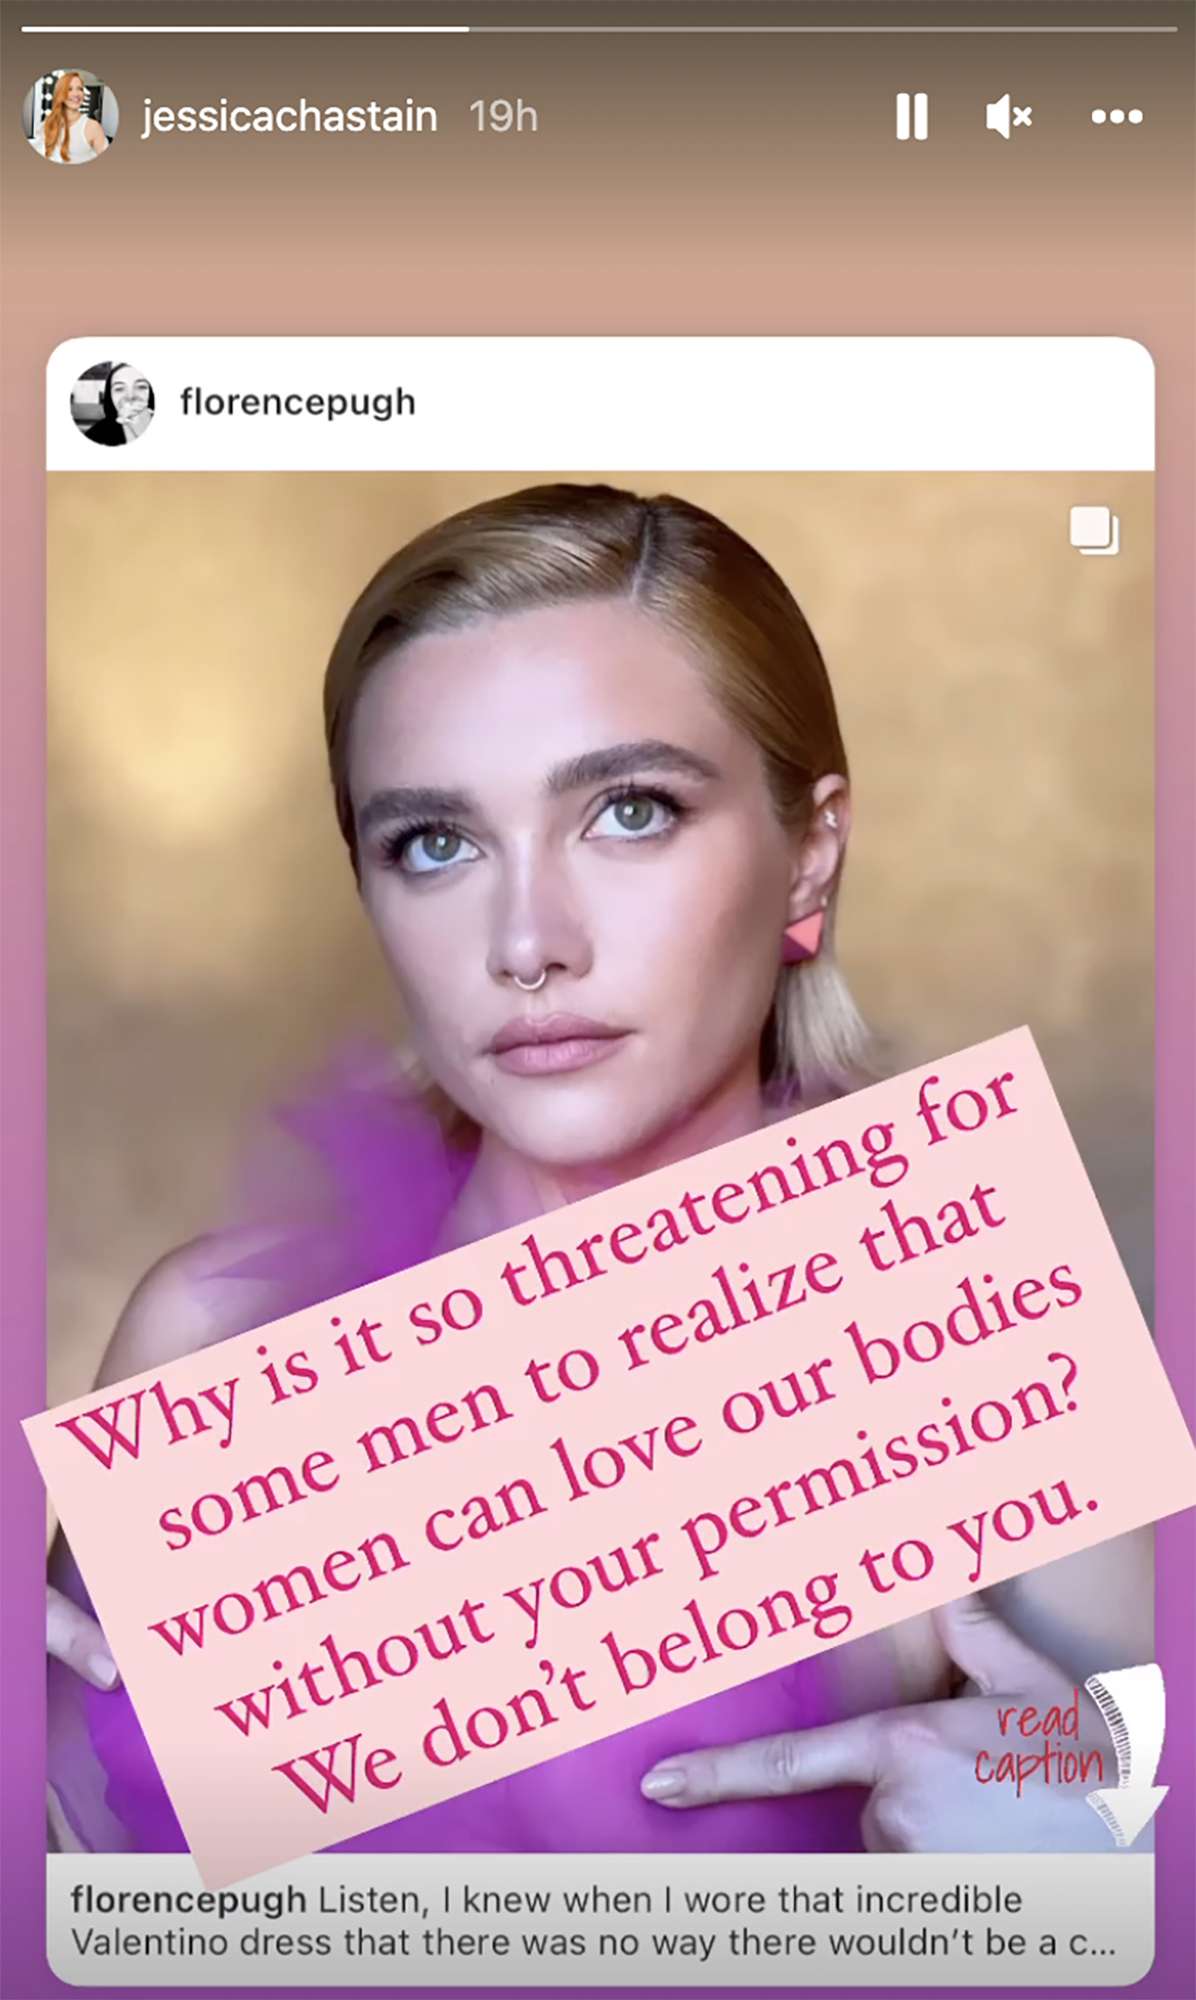 Jessica Chastain Publicly Defends Florence Pugh Decision to Free the Nipple at Valentino Show: “We Don’t Belong to You”. https://www.instagram.com/stories/jessicachastain/2880216812128967935/